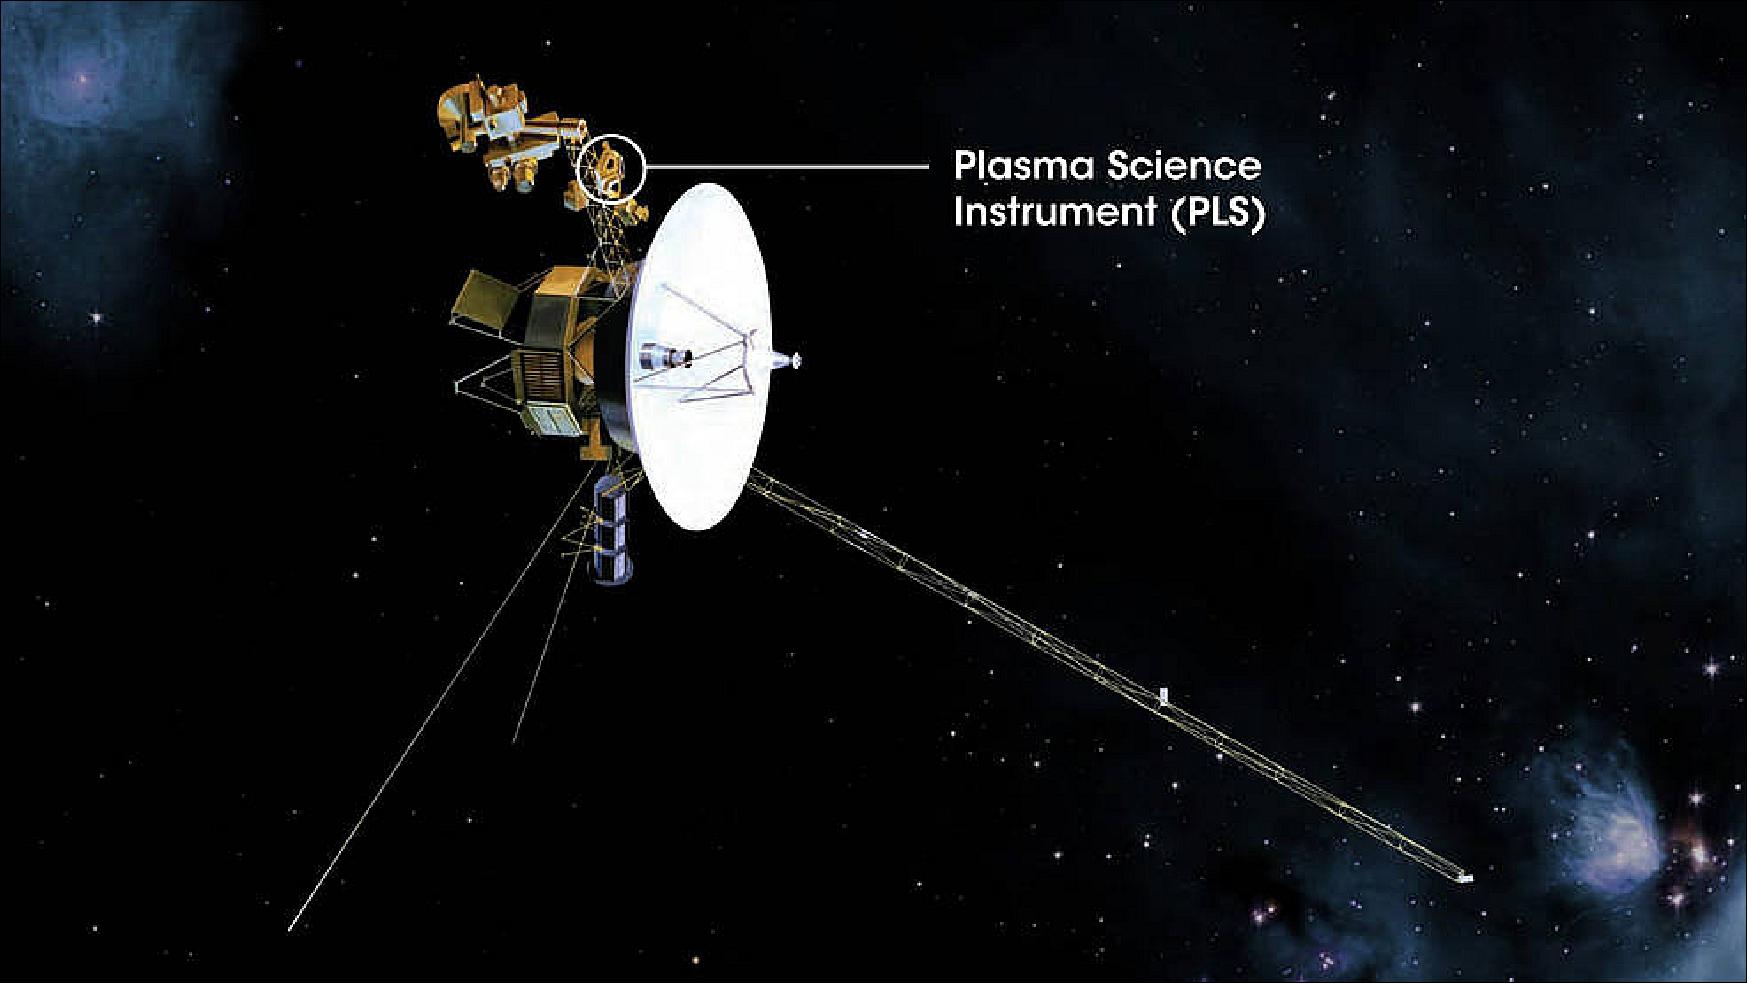 Figure 18: Illustration of NASA’s Voyager spacecraft, with the PLS (Plasma Science) instrument displayed (image credit: NASA’s Goddard Space Flight Center/Jet Propulsion Laboratory/Mary Pat Hrybyk-Keith)